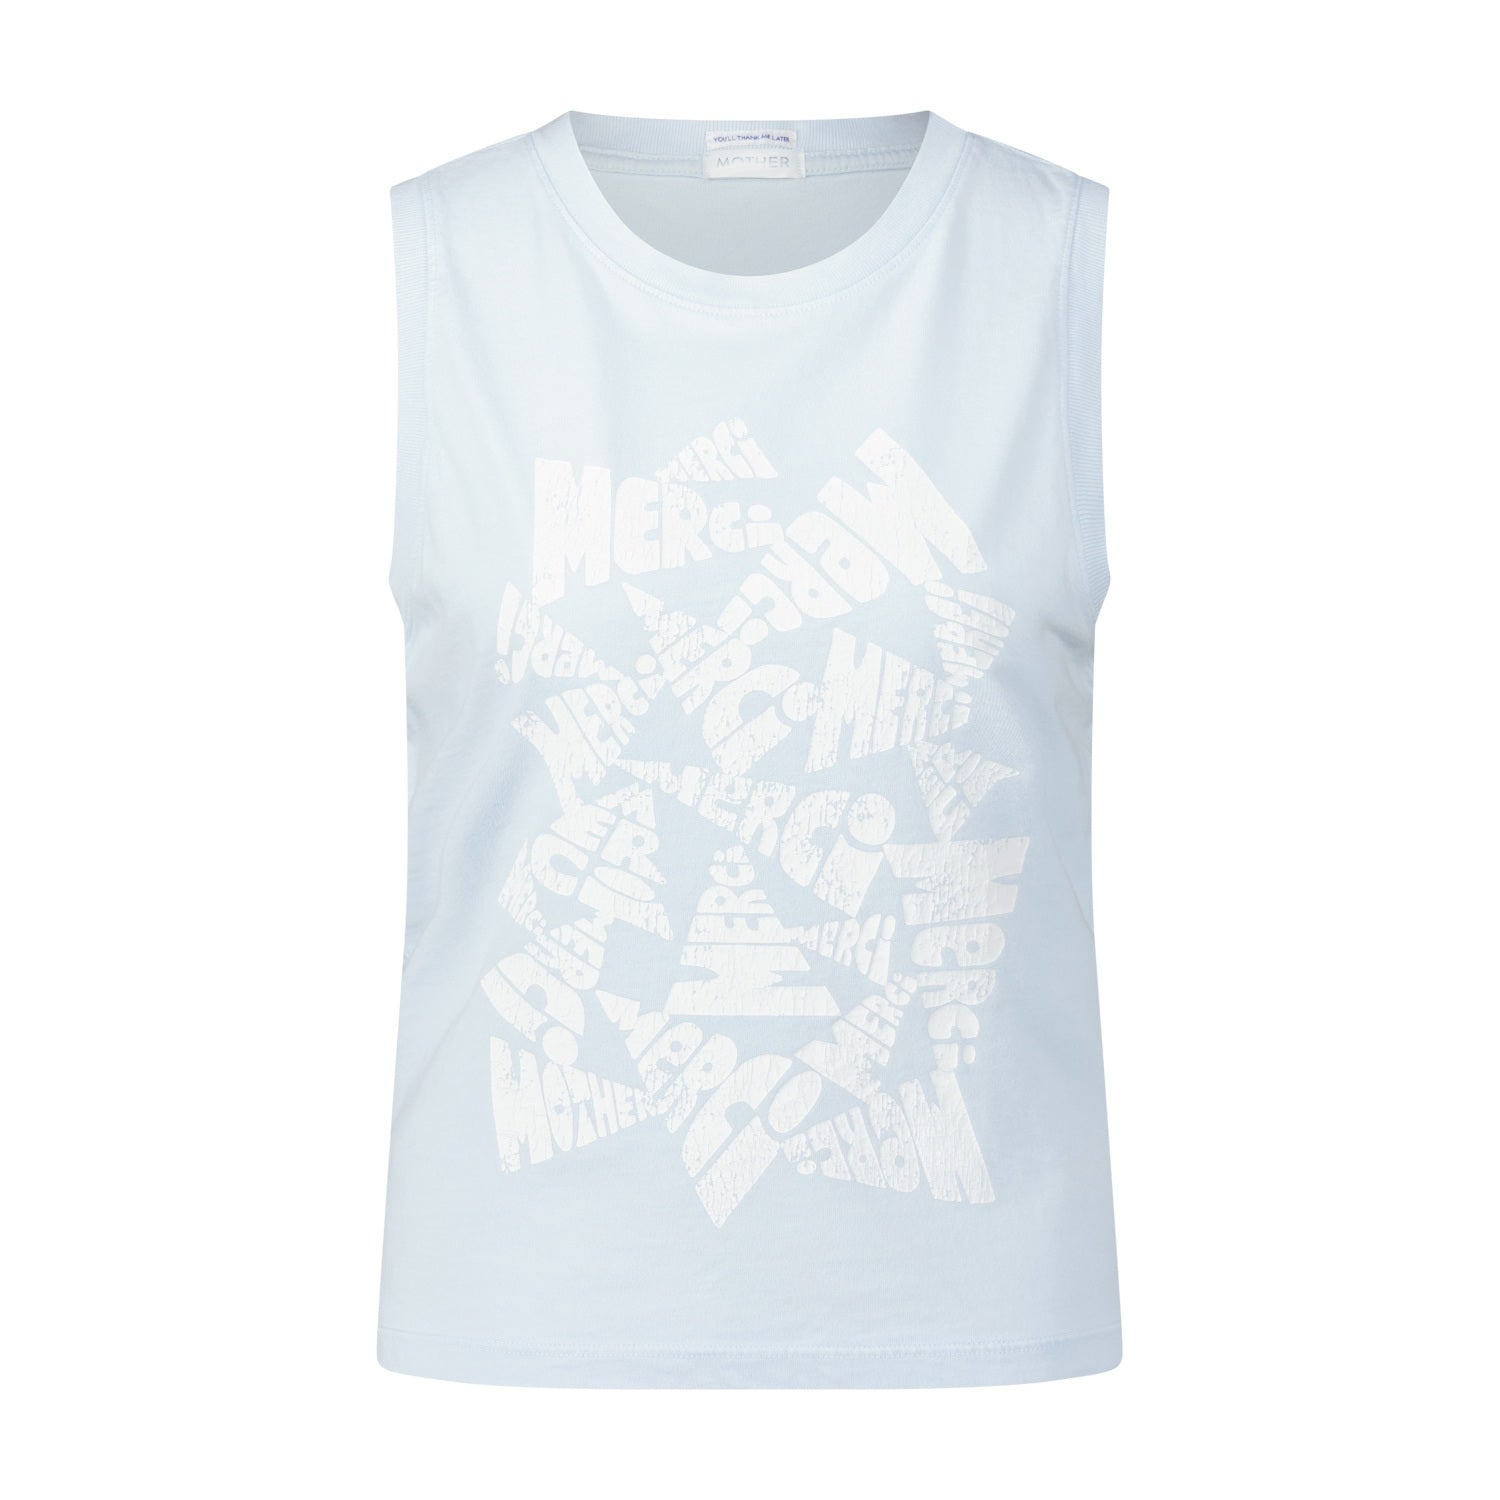 Tanktop The Strong And Silent Type mit Print im Used Look